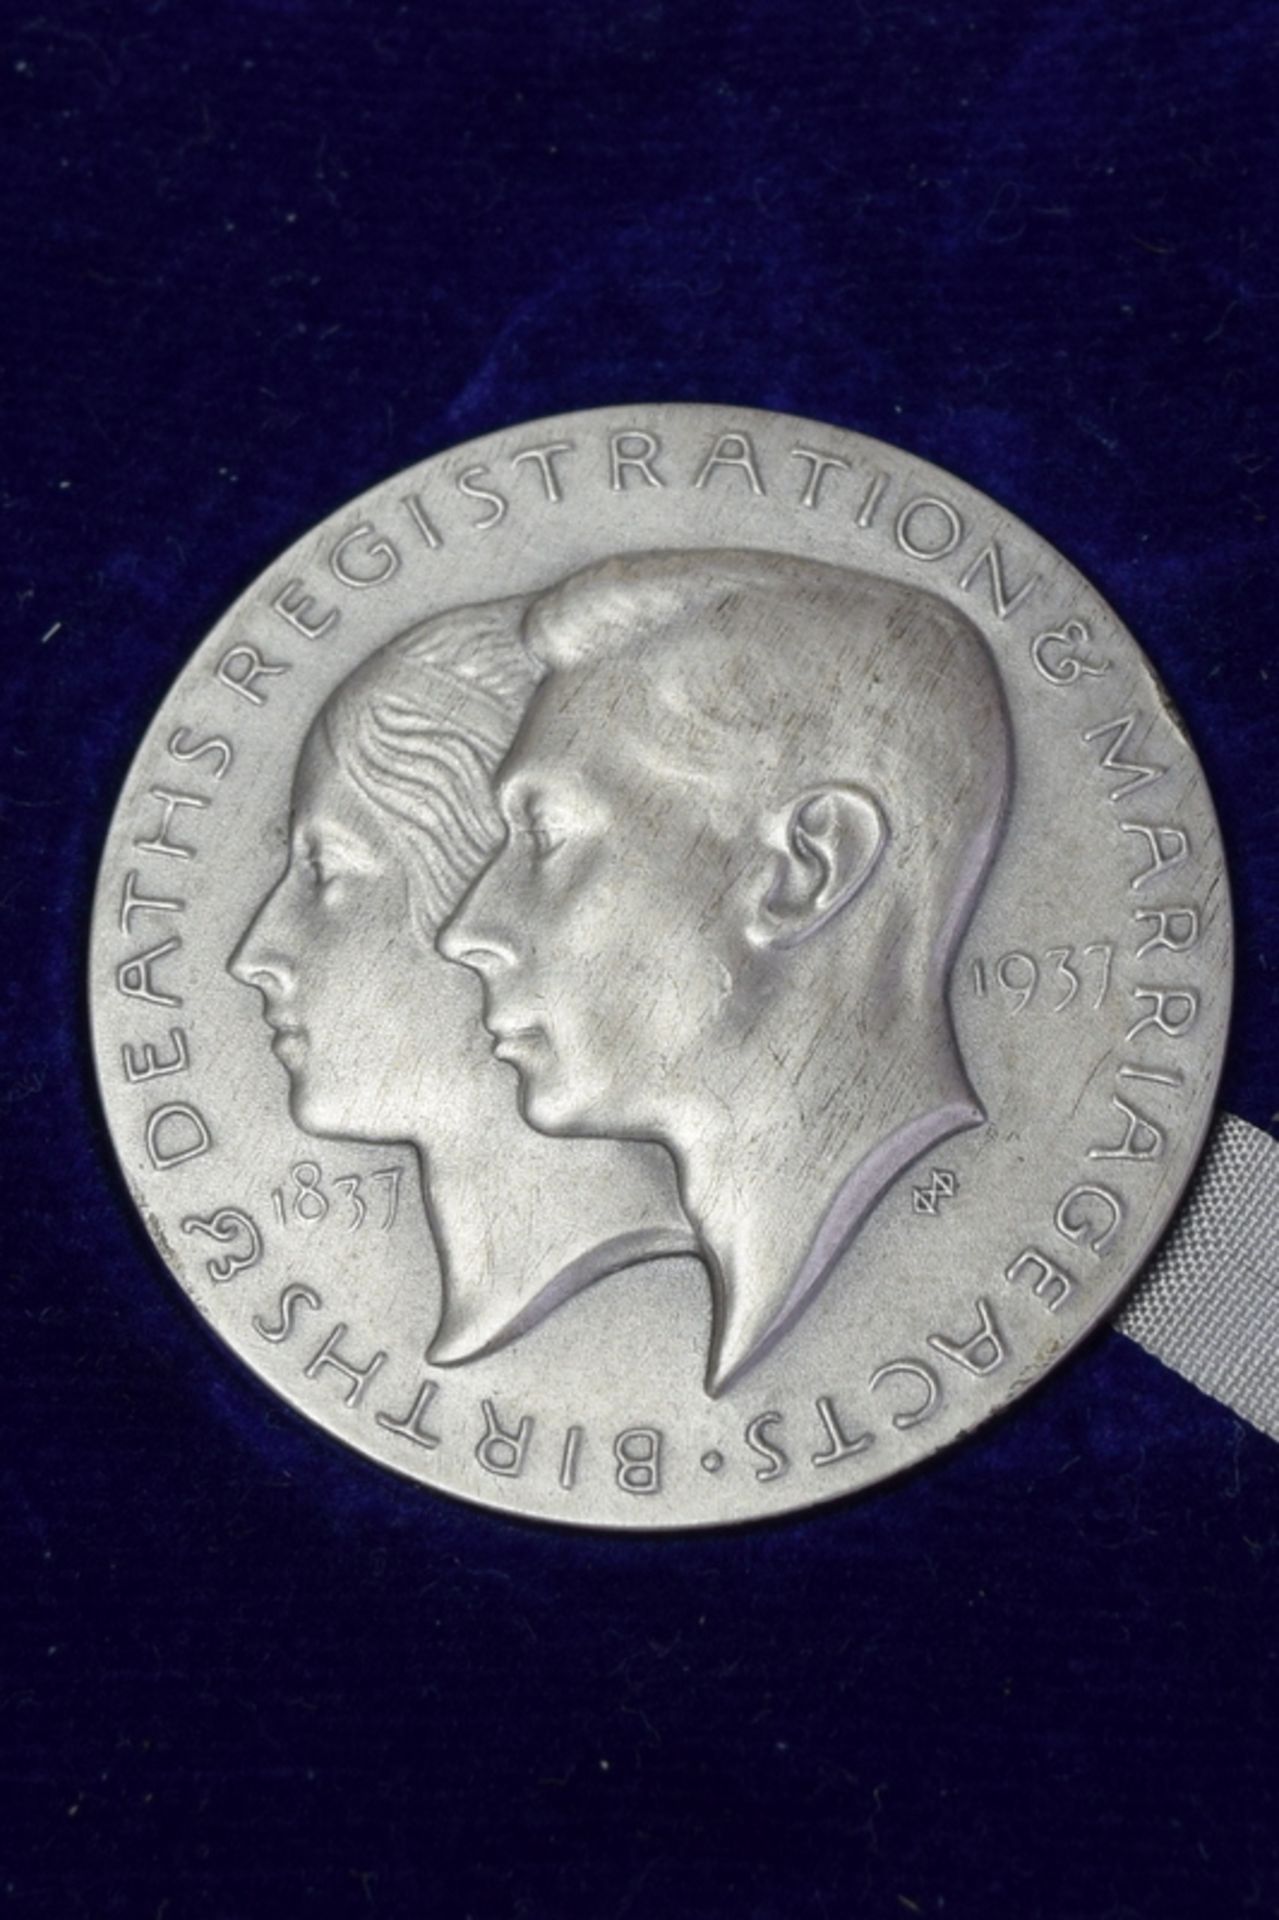 Silver Anniversary Coin 1837-1937 Births Deaths And Marriages Act